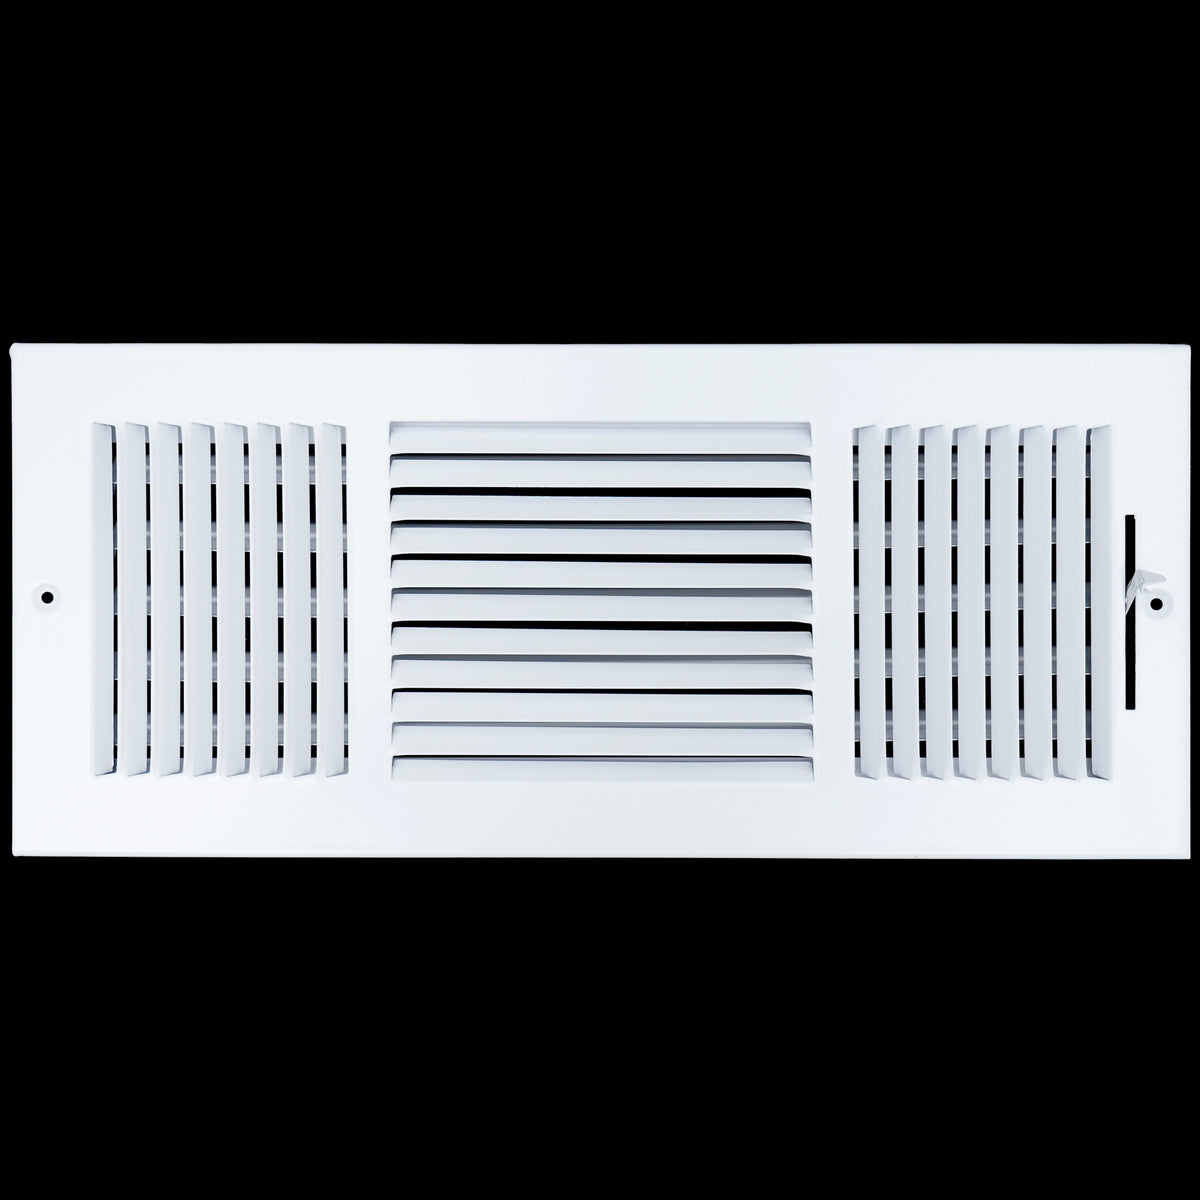 airgrilles 16 x 6 duct opening  -  3 way steel air supply diffuser for sidewall and ceiling hnd-asg-wh-3way-16x6 764613097689 - 1